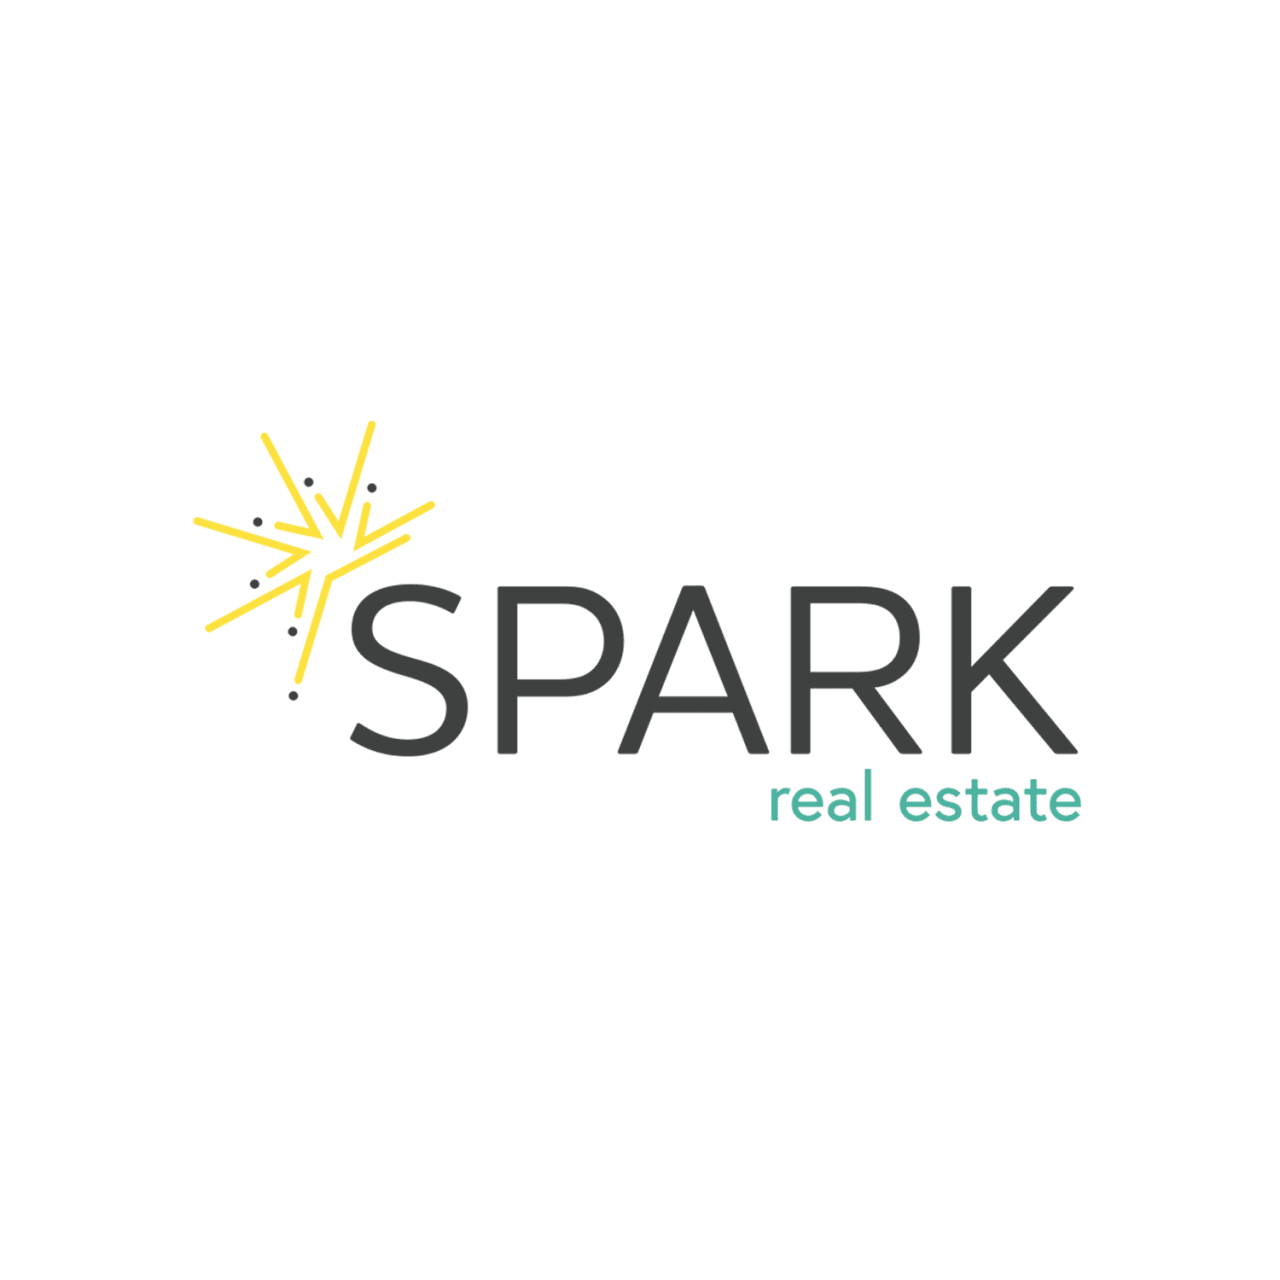 What is a Property Appraisal and why do I need one? - Spark Real Estate